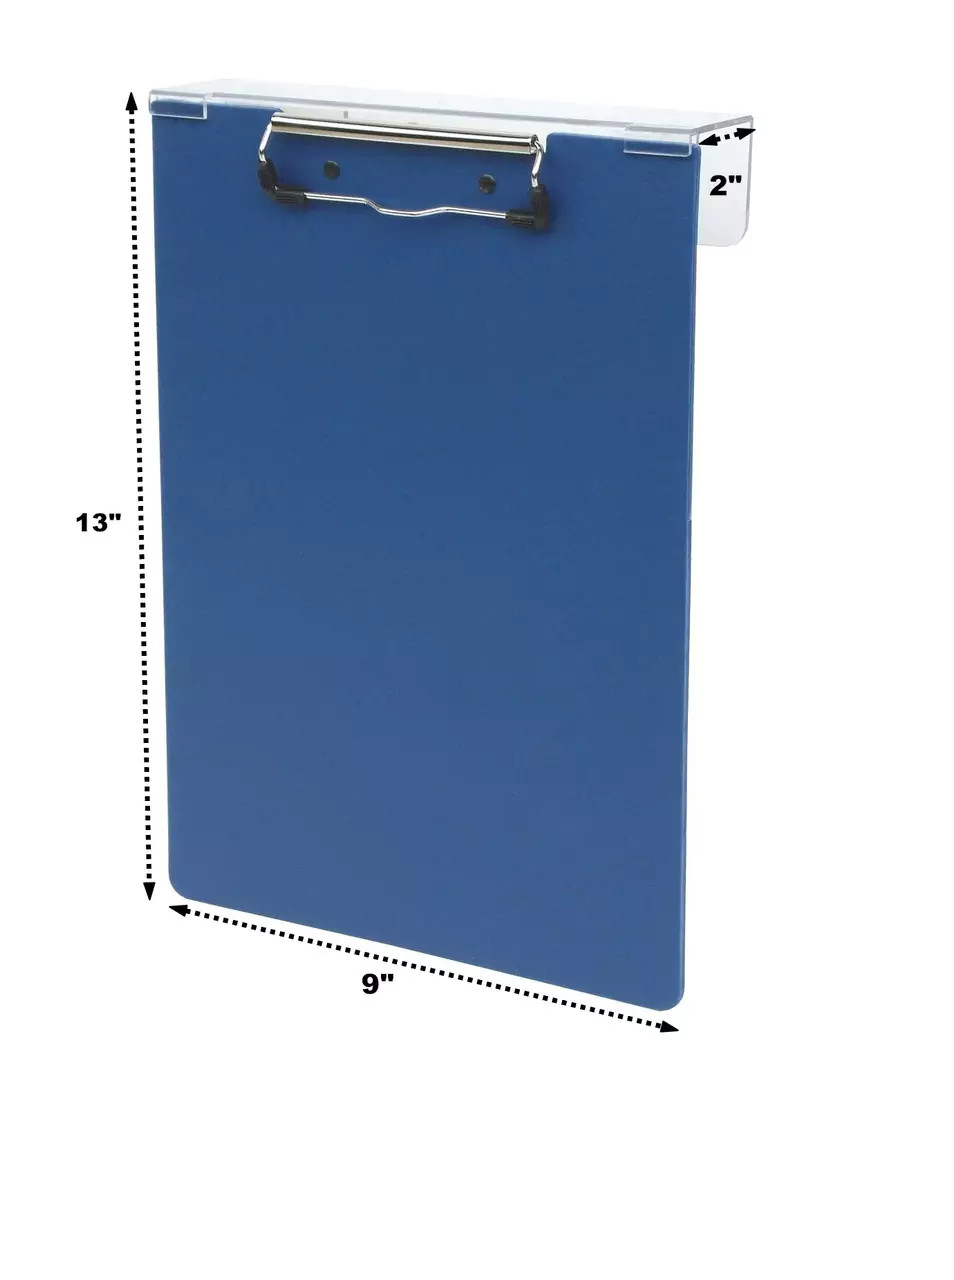 American made Over-The-Bed-Clipboard Dimensions